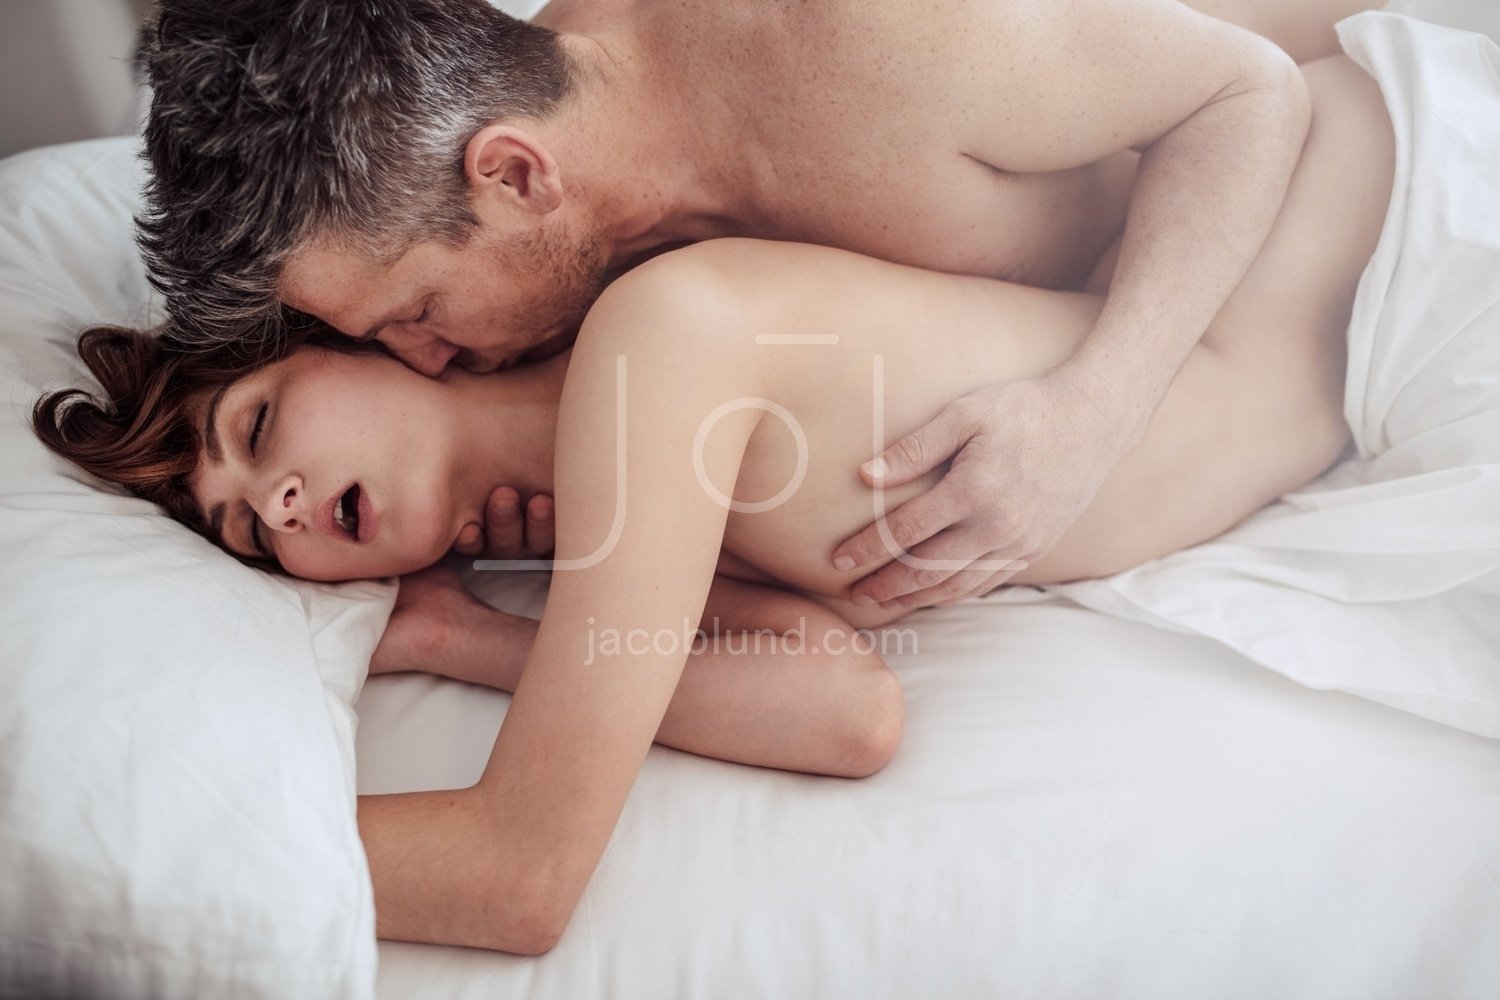 wife and husband in bed sex